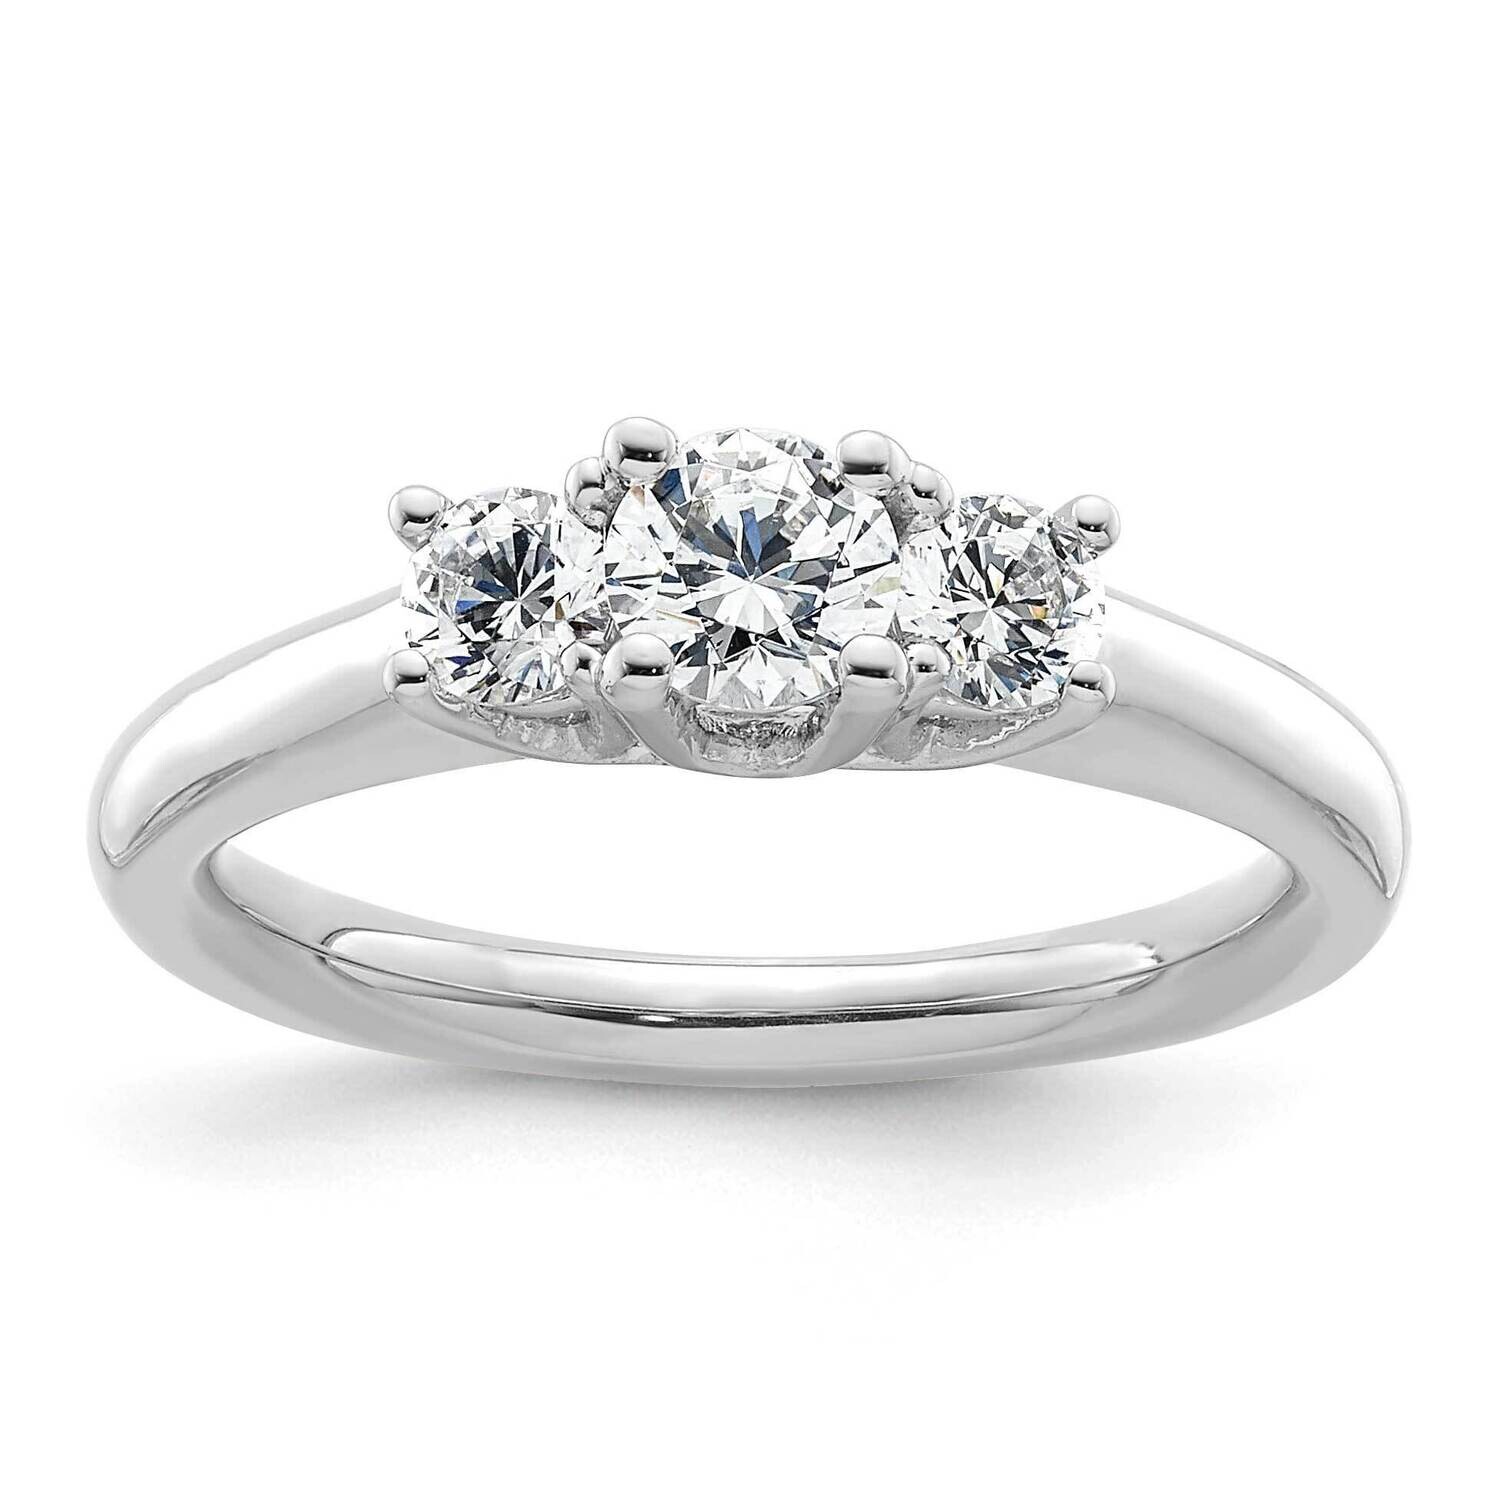 3-Stone Holds 3/8 Carat 4.6mm Round Center 2-3.5mm Round Sides Engagement Ring Mounting 14k White Gold RM2946E-038-CWAA